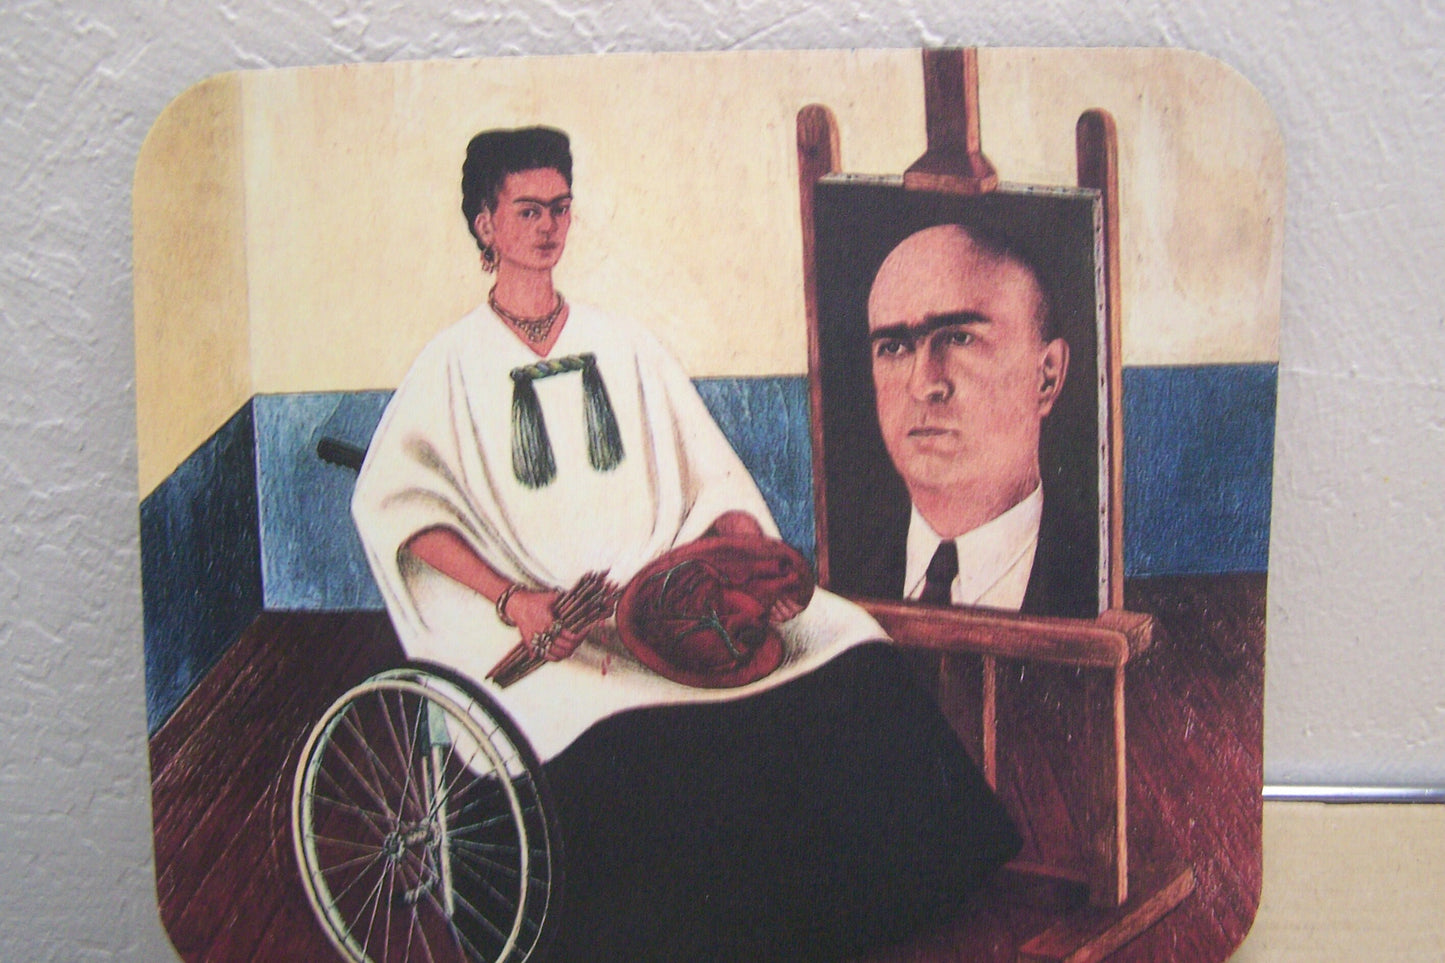 Mousepad - Frida Kahlo, Frida in Wheelchair with Doctor Eloesser